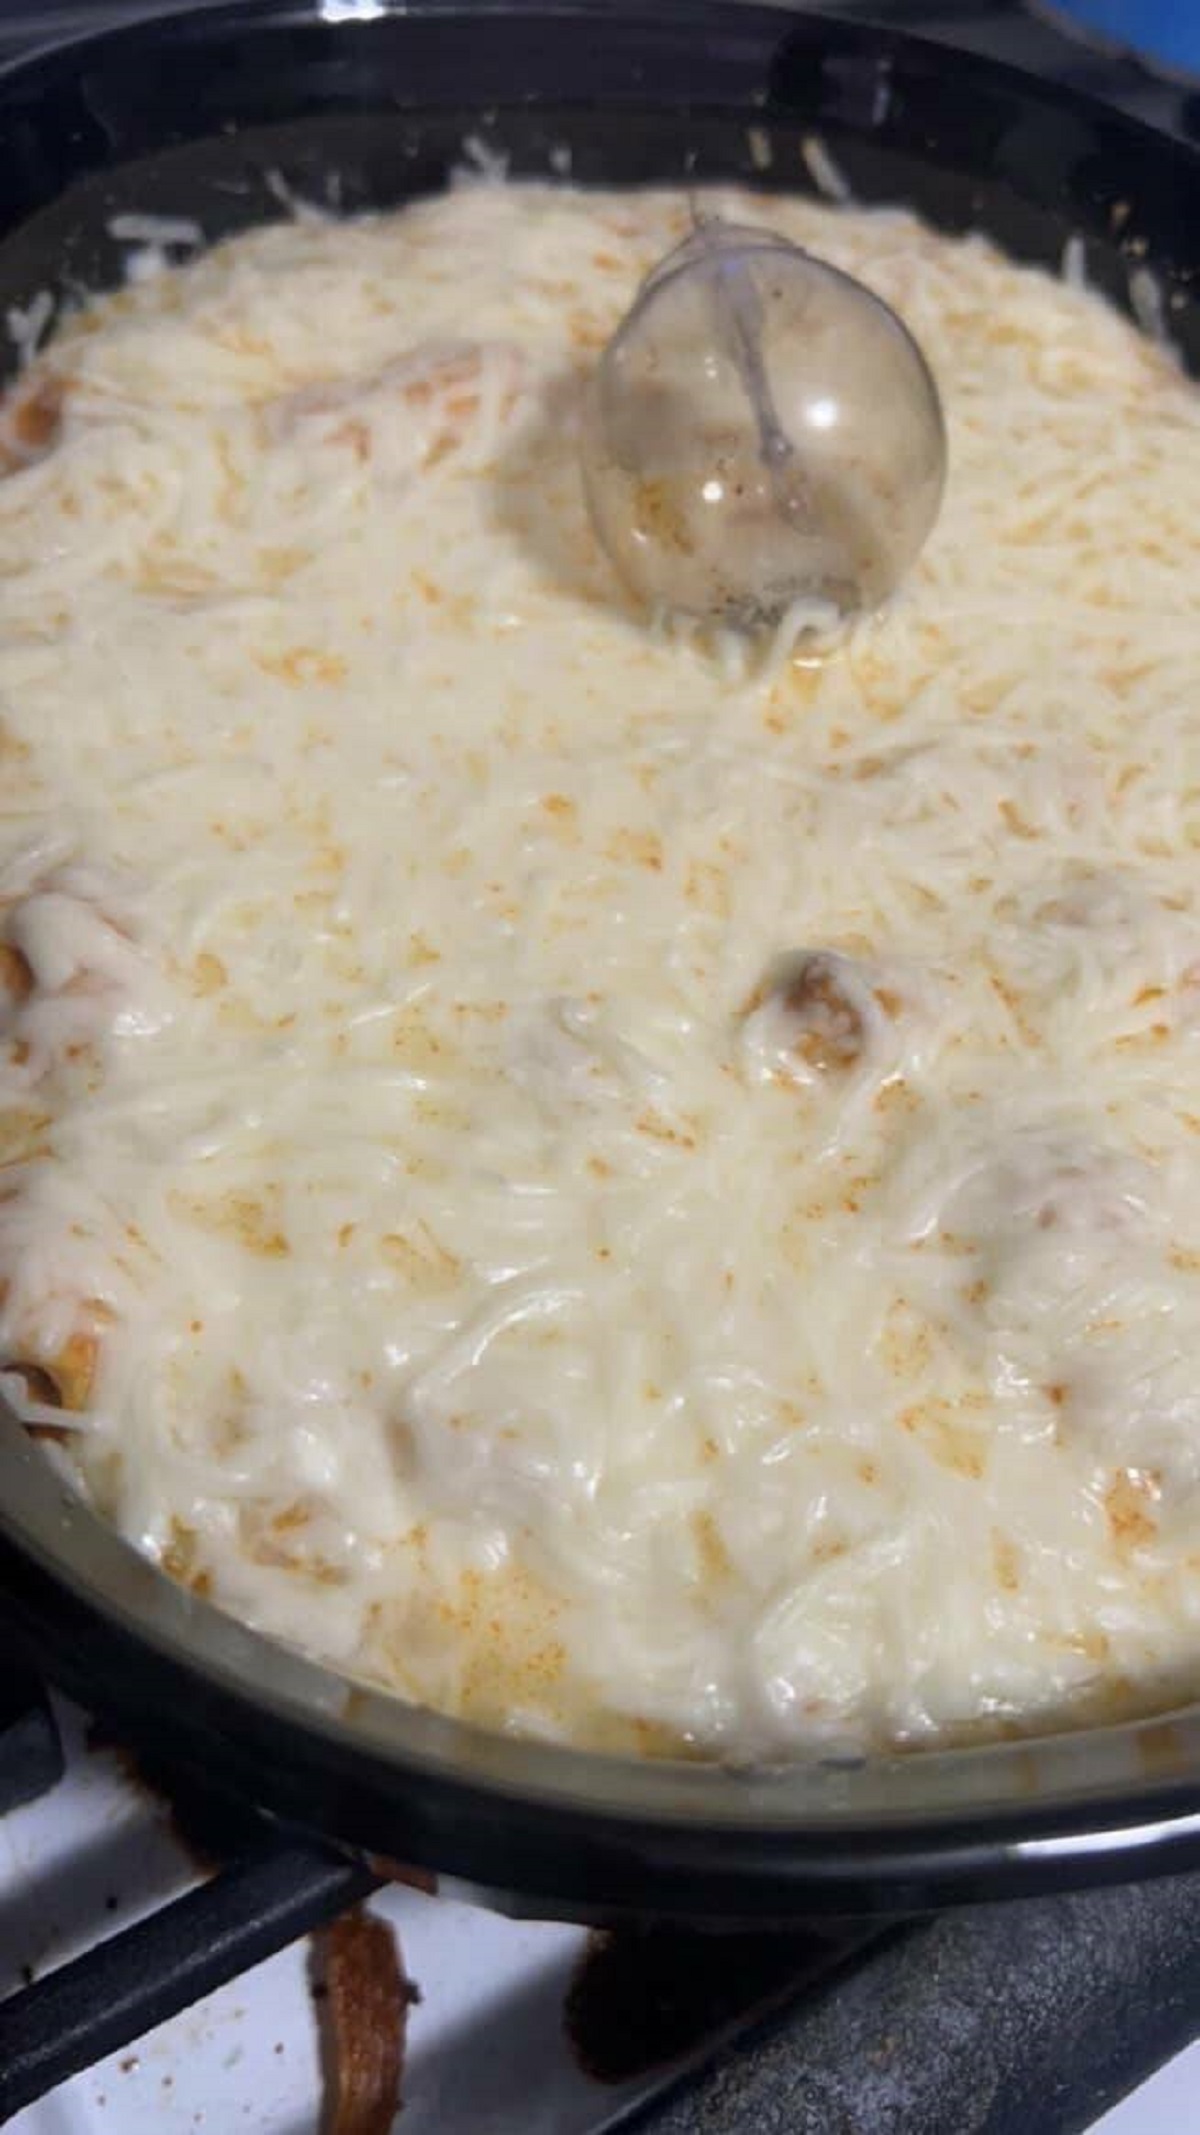 This person made a lovely dinner in 30 minutes, but then the oven light bulb shattered: